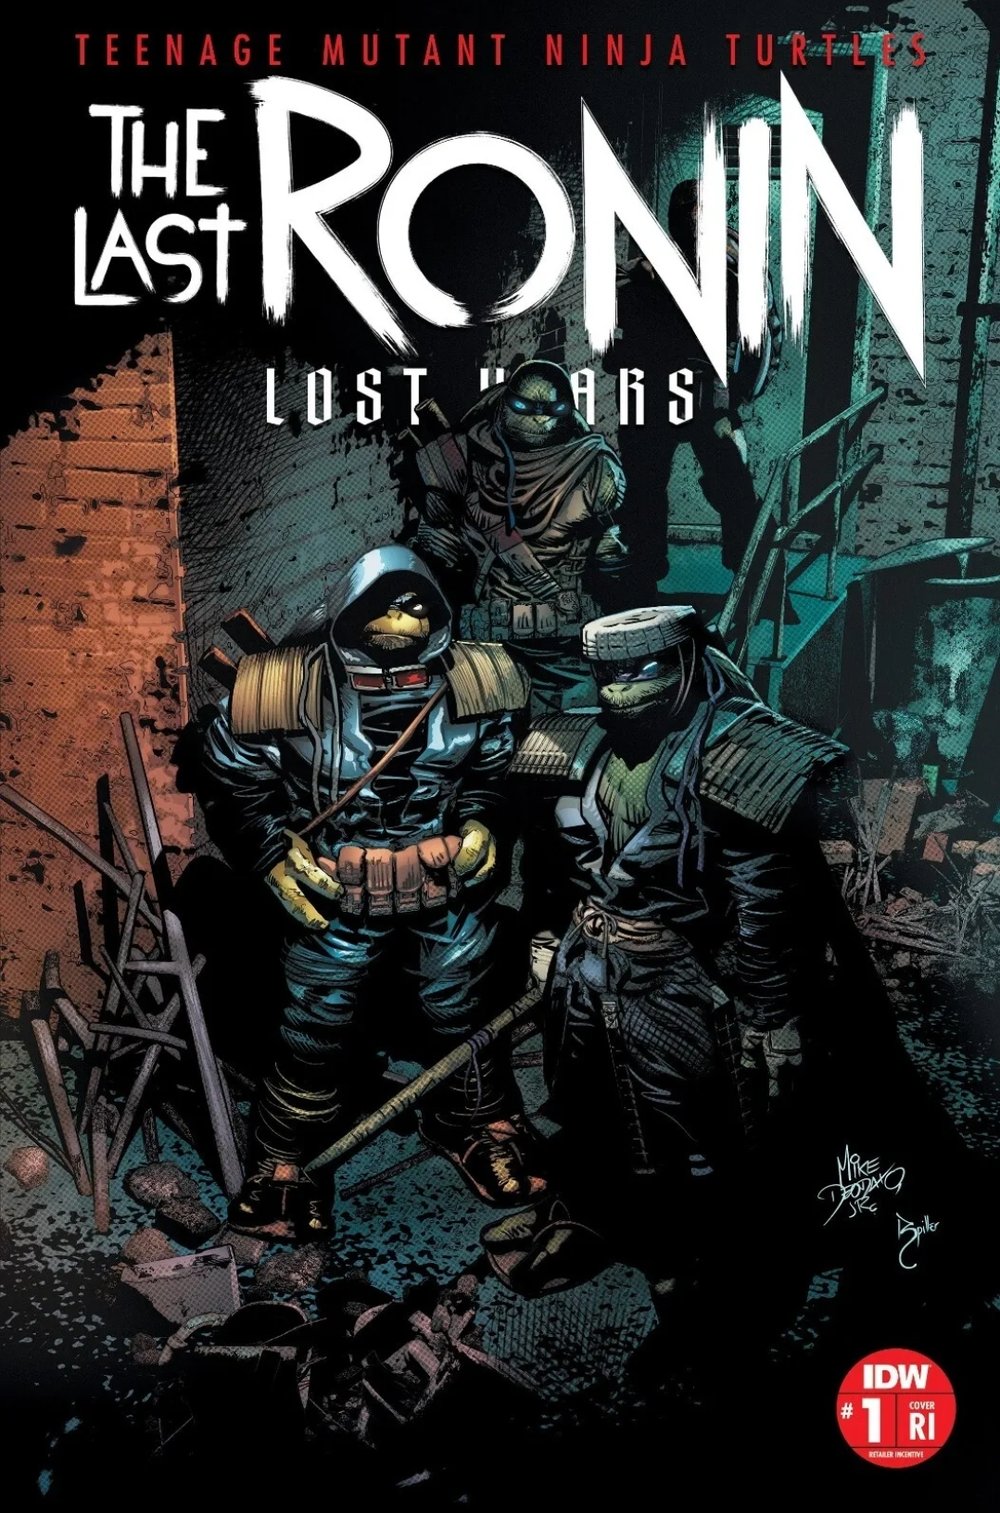 The Last Ronin: The Lost Years #1 - Ratio Incentive Covers 